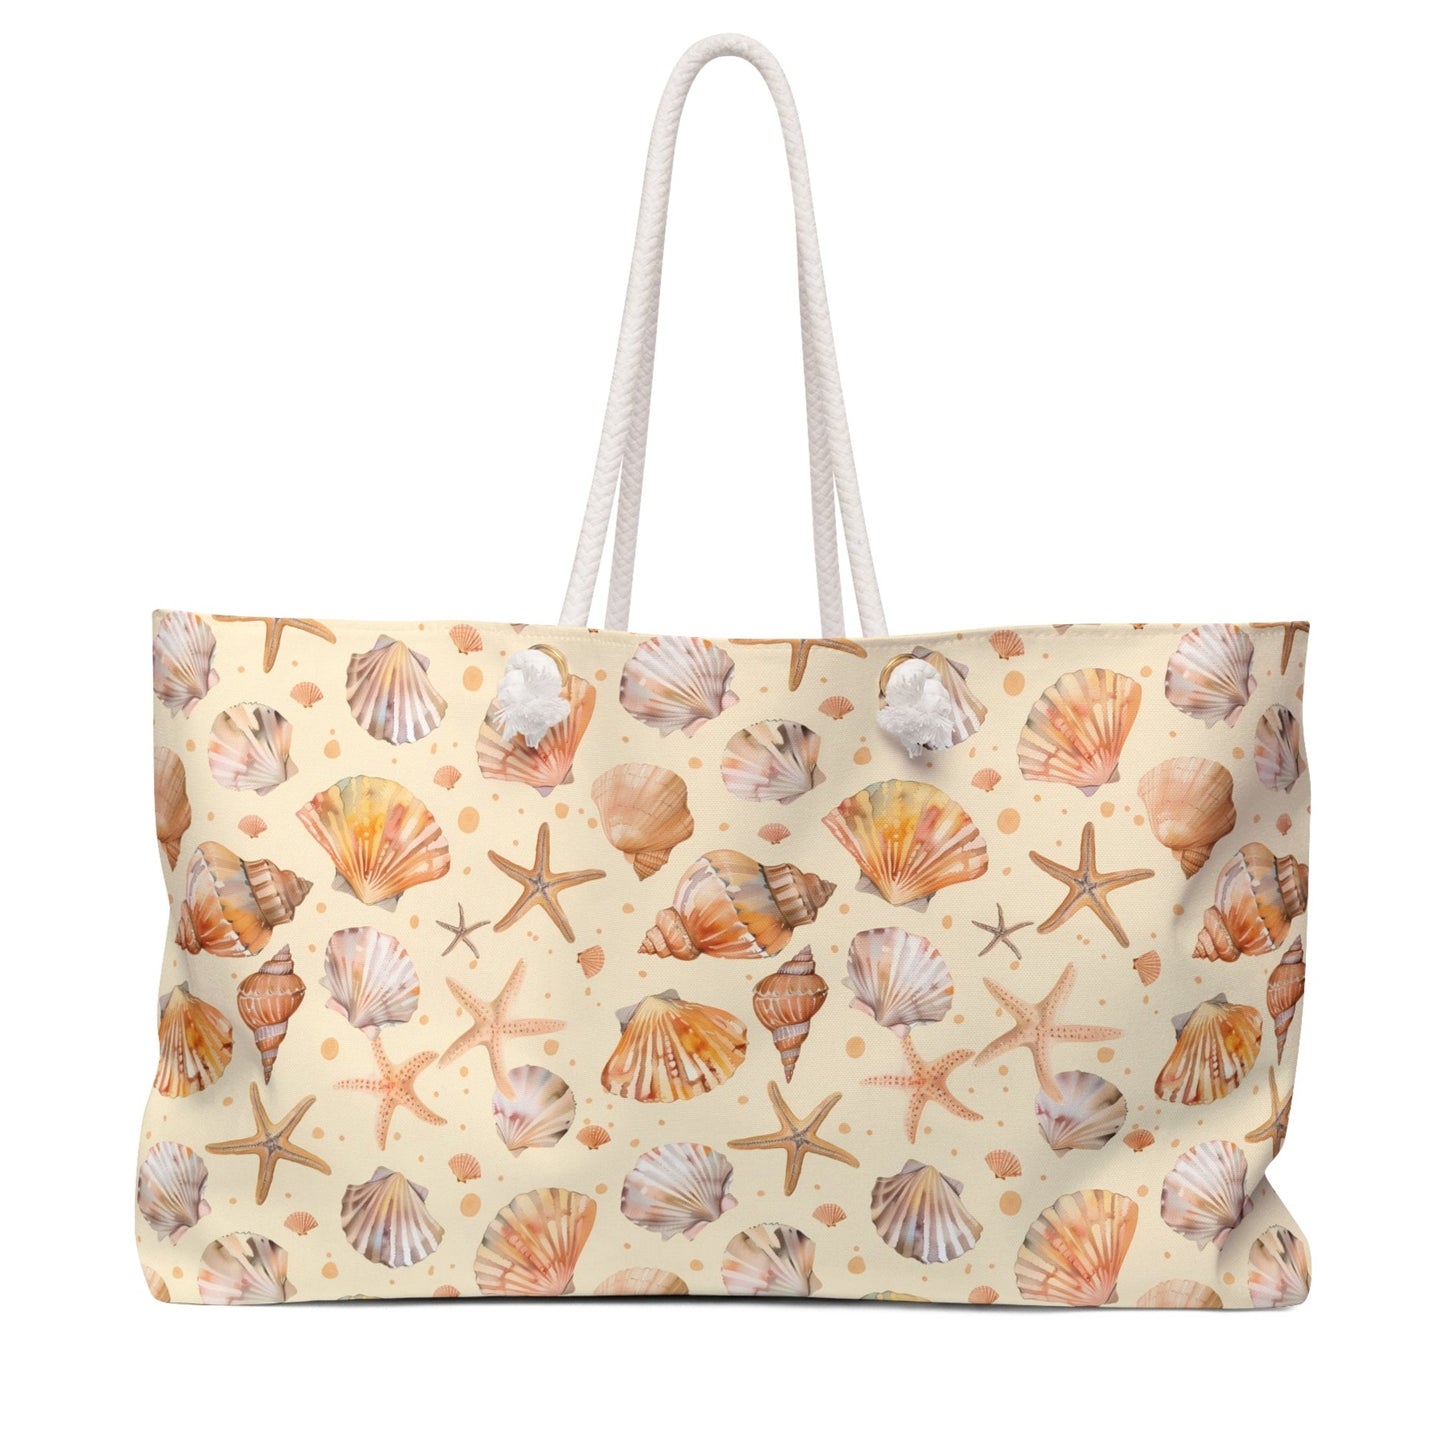 Deluxe Tote & Beach Bag with Seashell and Starfish Watercolor Design (24" × 13" x 5.5")